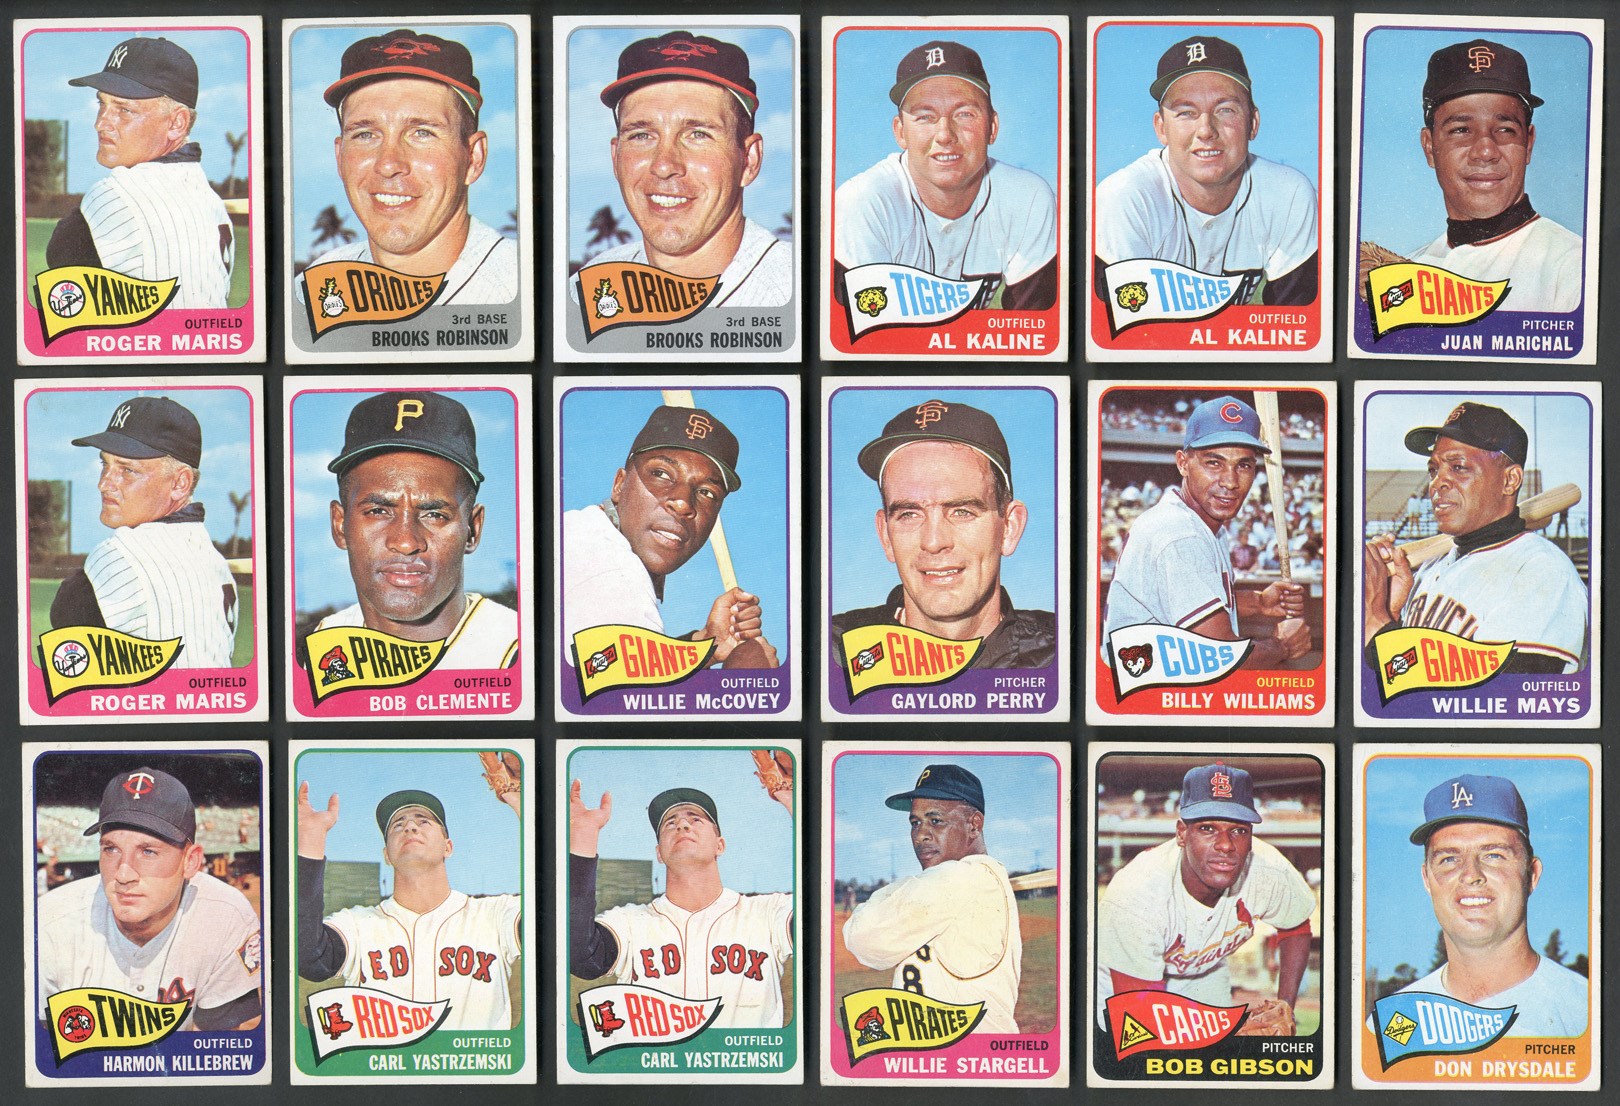 Baseball and Trading Cards - 1965 Topps Baseball Collection of 1600+ Cards with Stars!